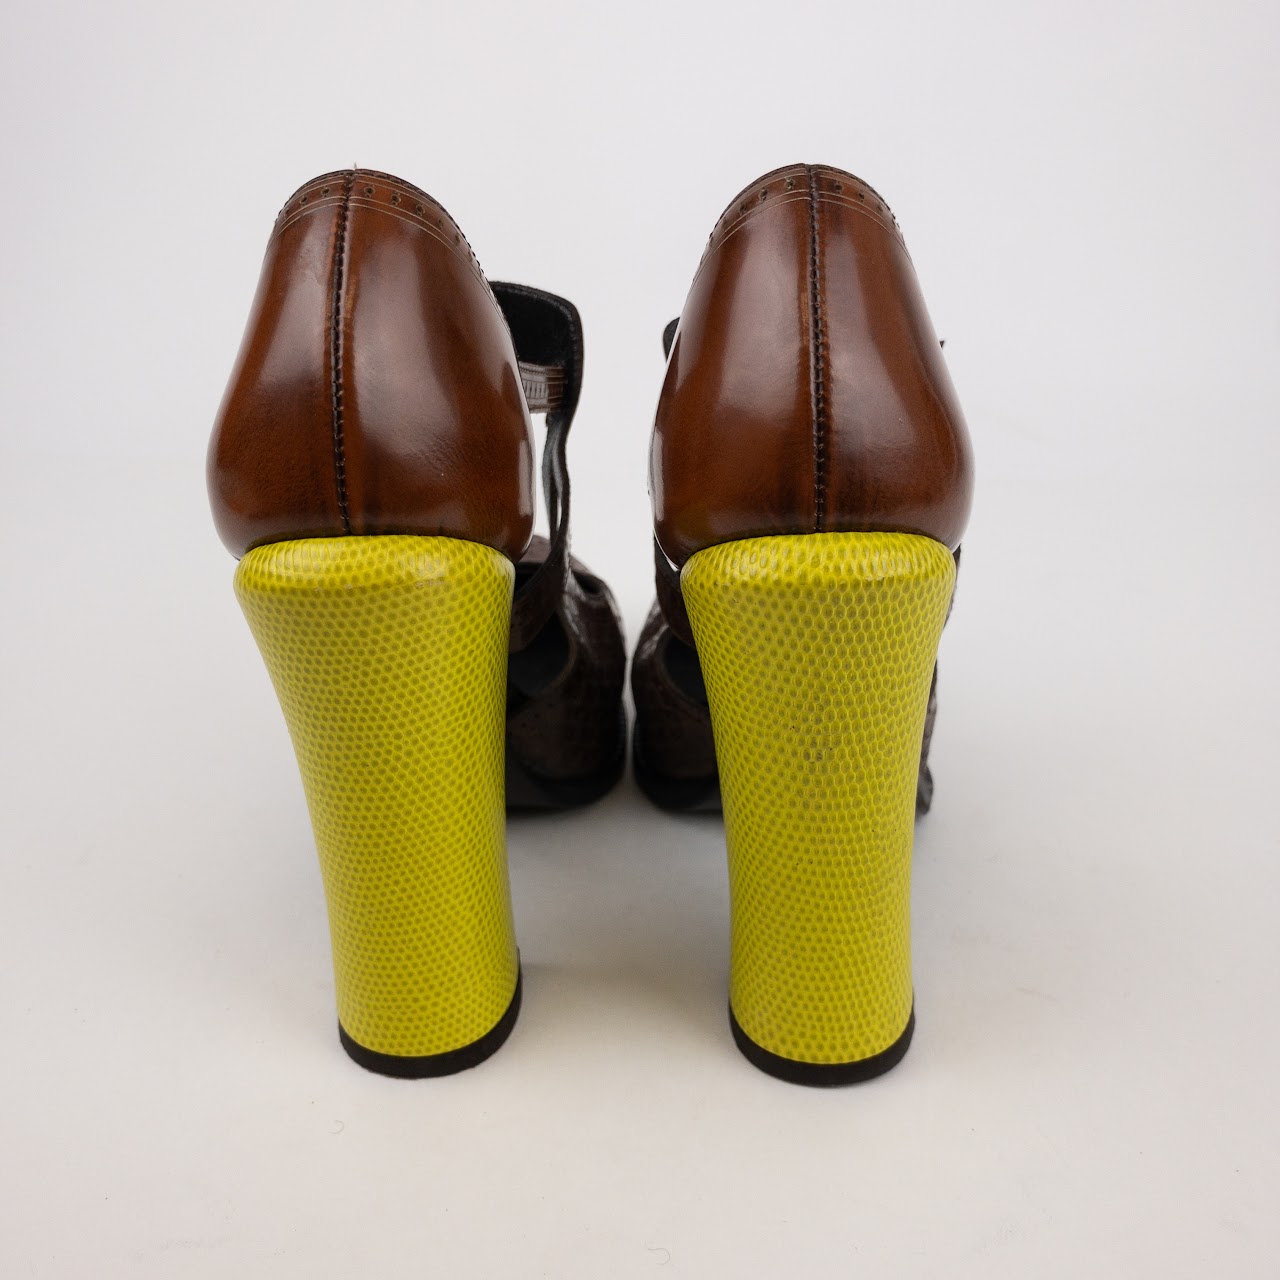 Fendi Brown and Yellow Leather Brogue Pumps